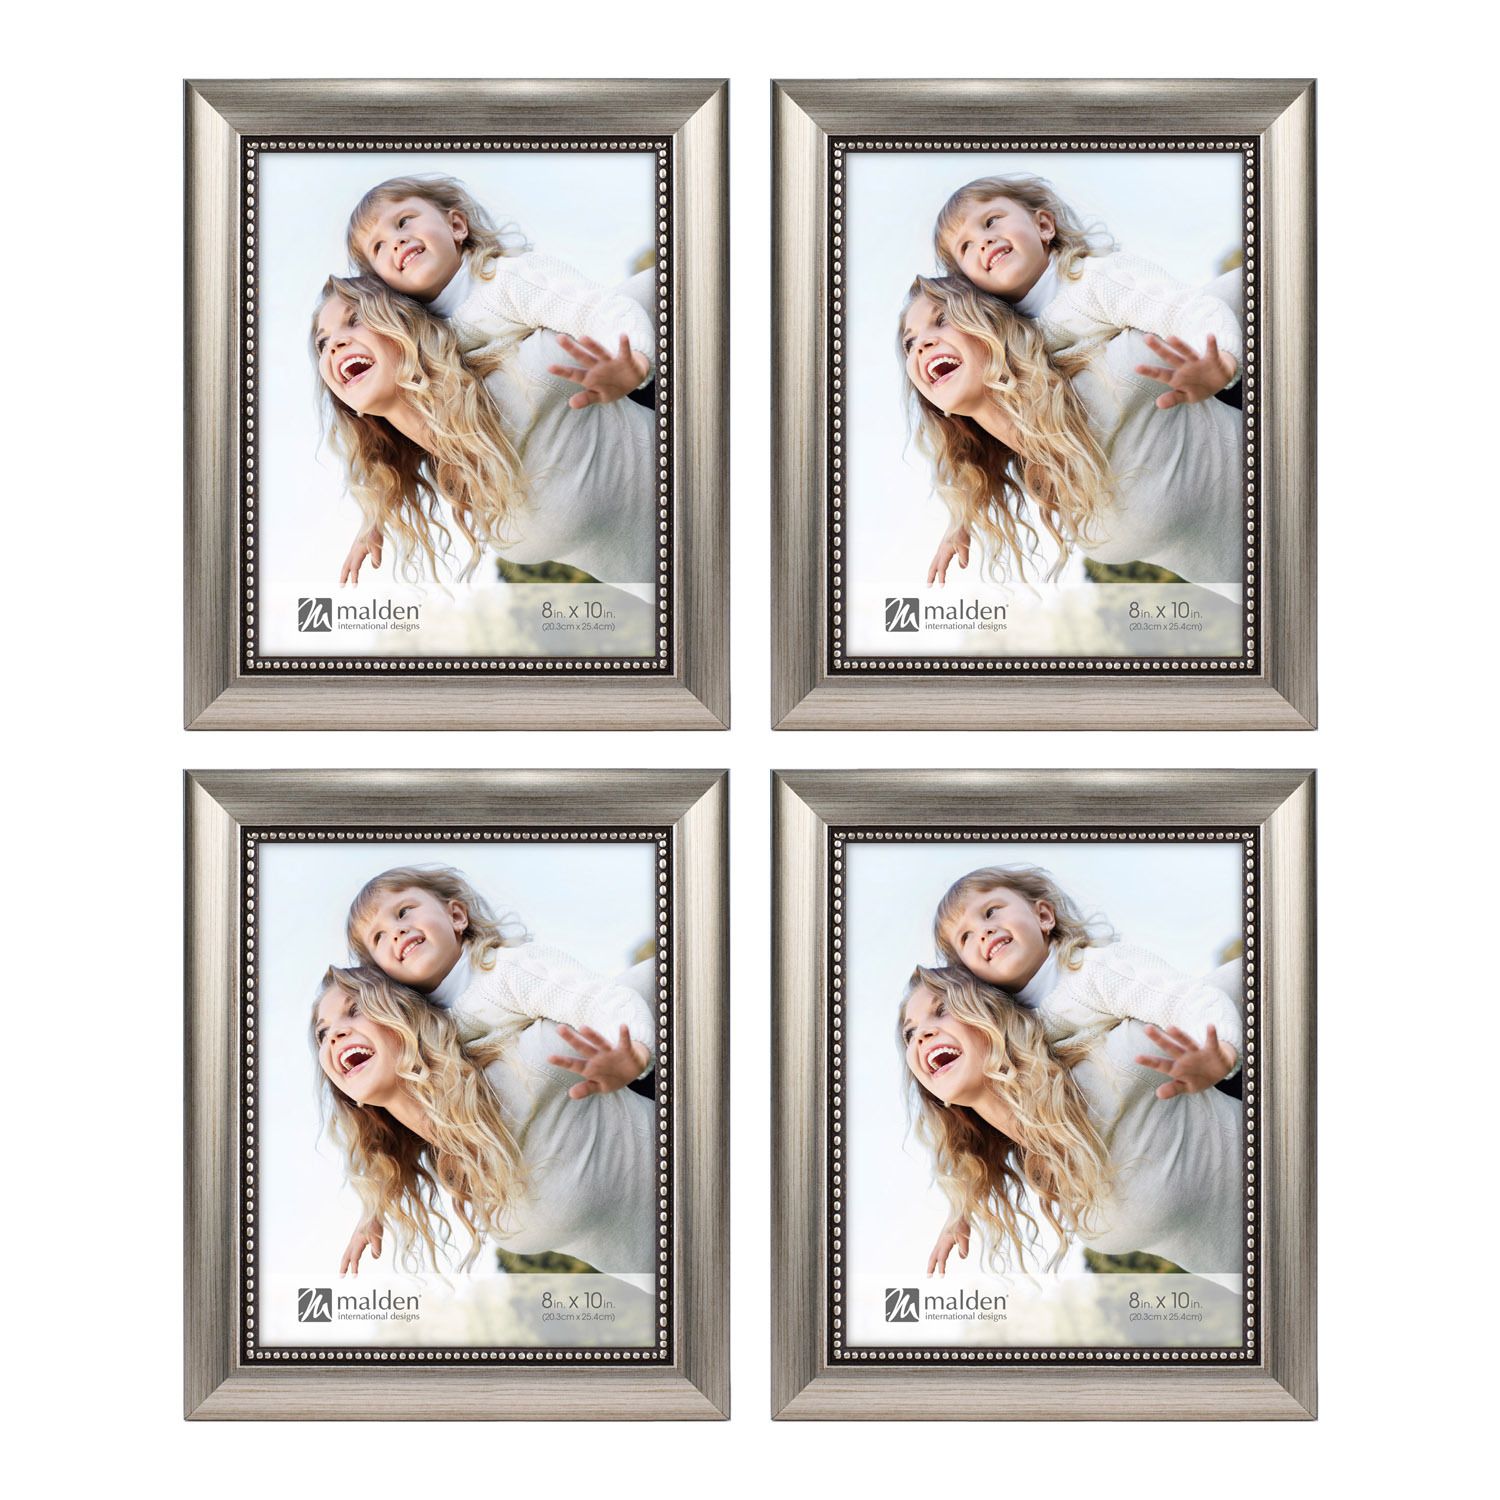 Amanti Art Hardwood Whitewash Wood Picture Frame Opening Size 11x14 (Matted  To 8x10 in.) Picture Frame